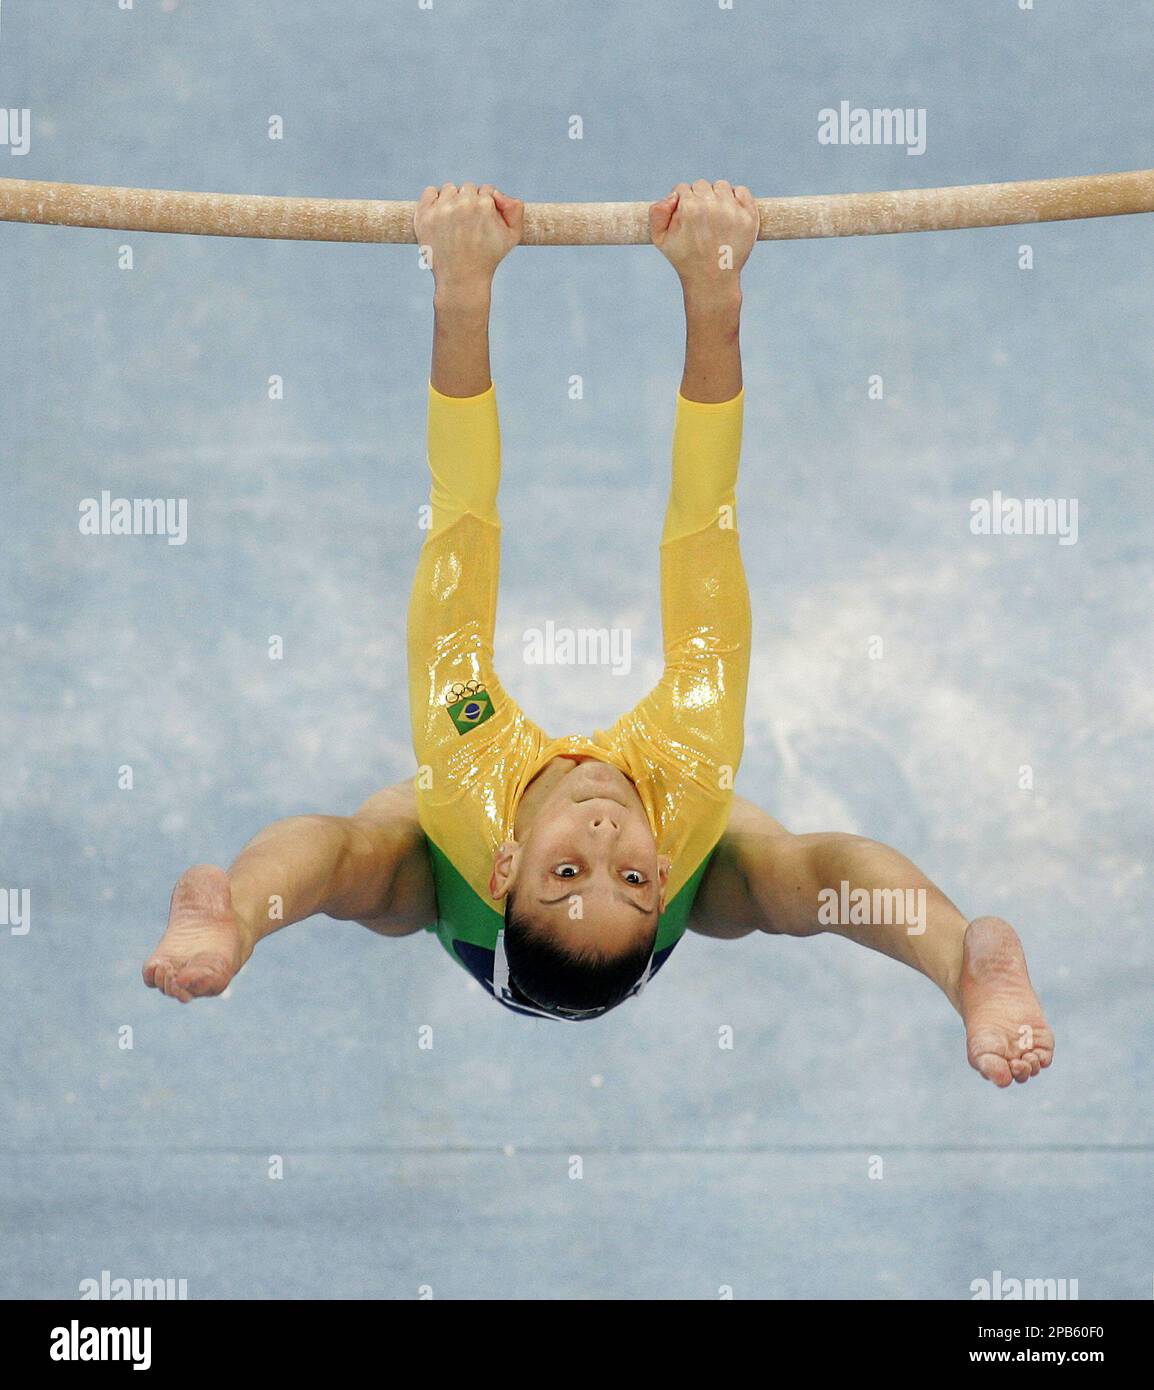 Brazil's Ana Claudia Silva competes at the uneven bars during a qualification of the Gymnastics World Championships in Stuttgart, southern Germany, on Sunday, Sept. 2, 2007. The 40th Gymnastics World Championships take place in Stuttgart from Sept. 1 to Sept. 9, 2007. (AP Photo/Daniel Maurer) Stockfoto